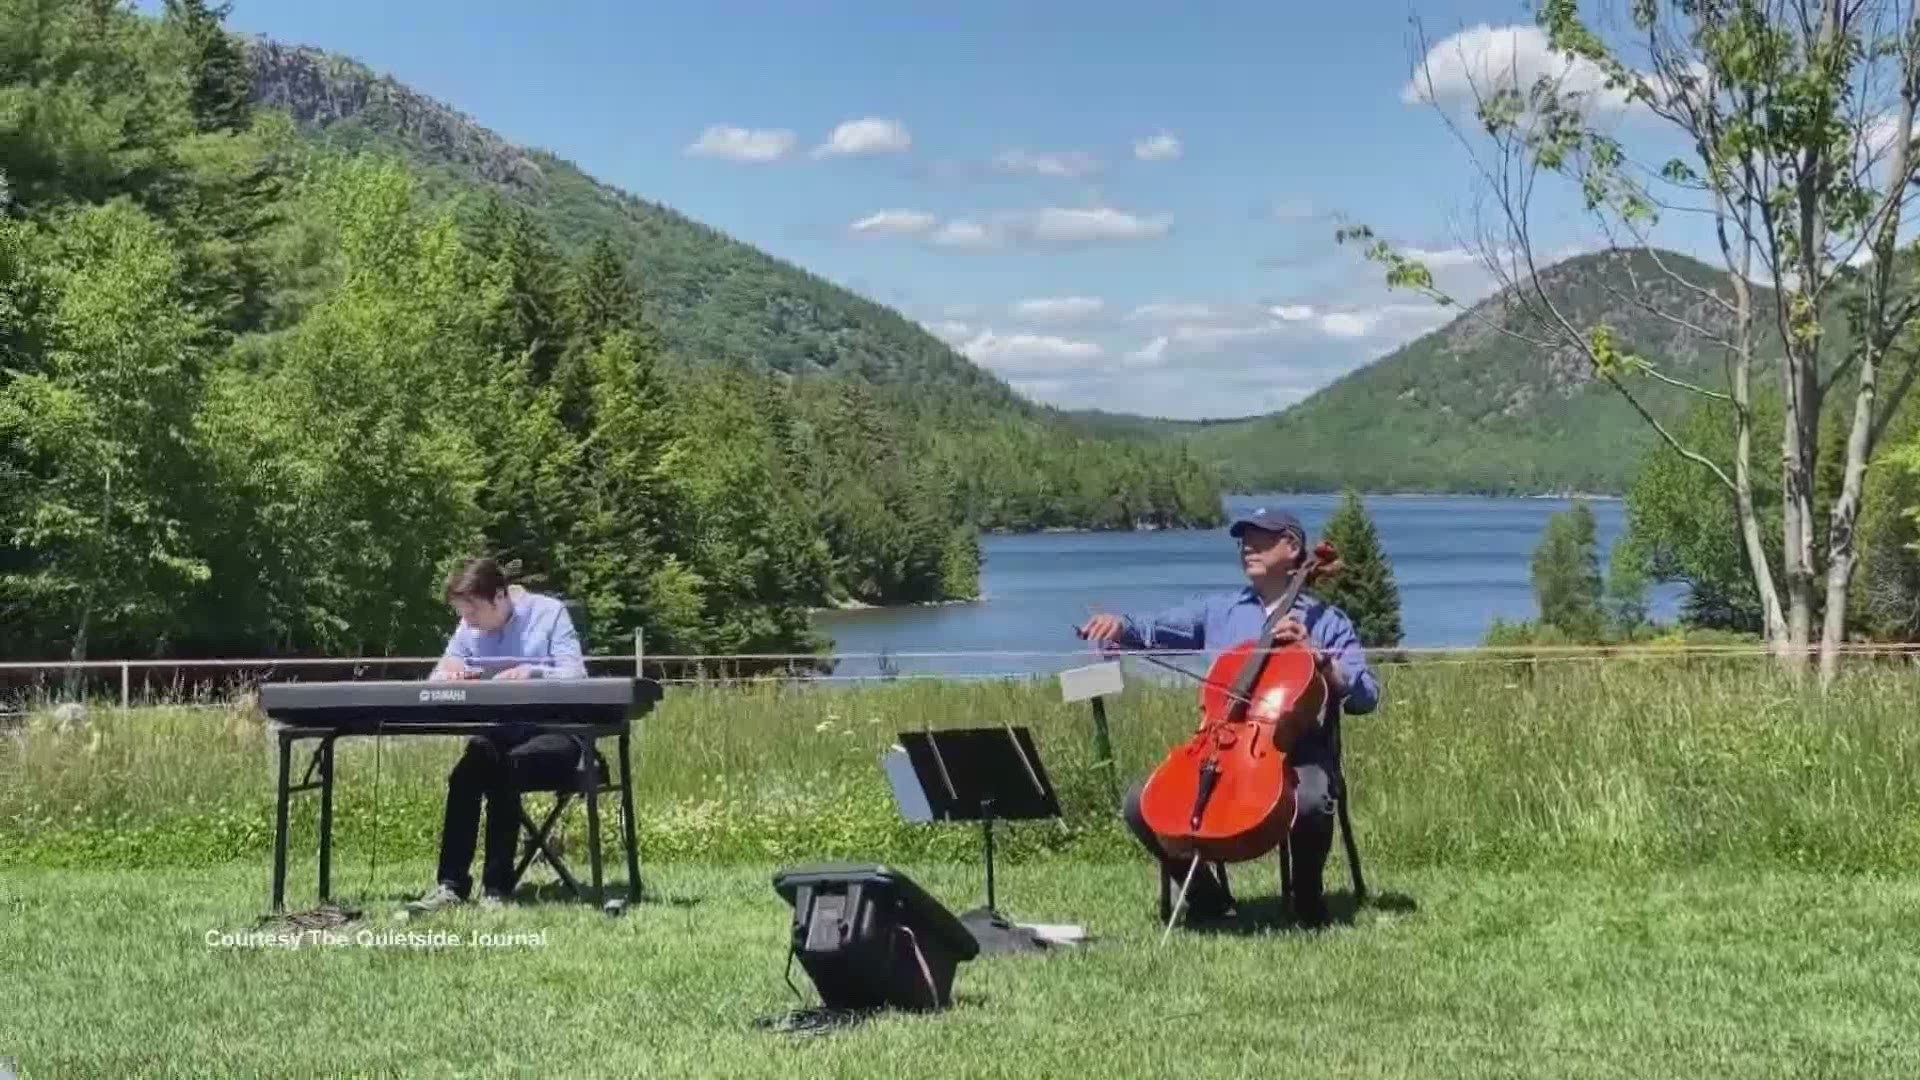 The musician was invited to the Jordan Pond House in the park, and his performance was to pay tribute to indigenous people of the Wabanaki Nations.